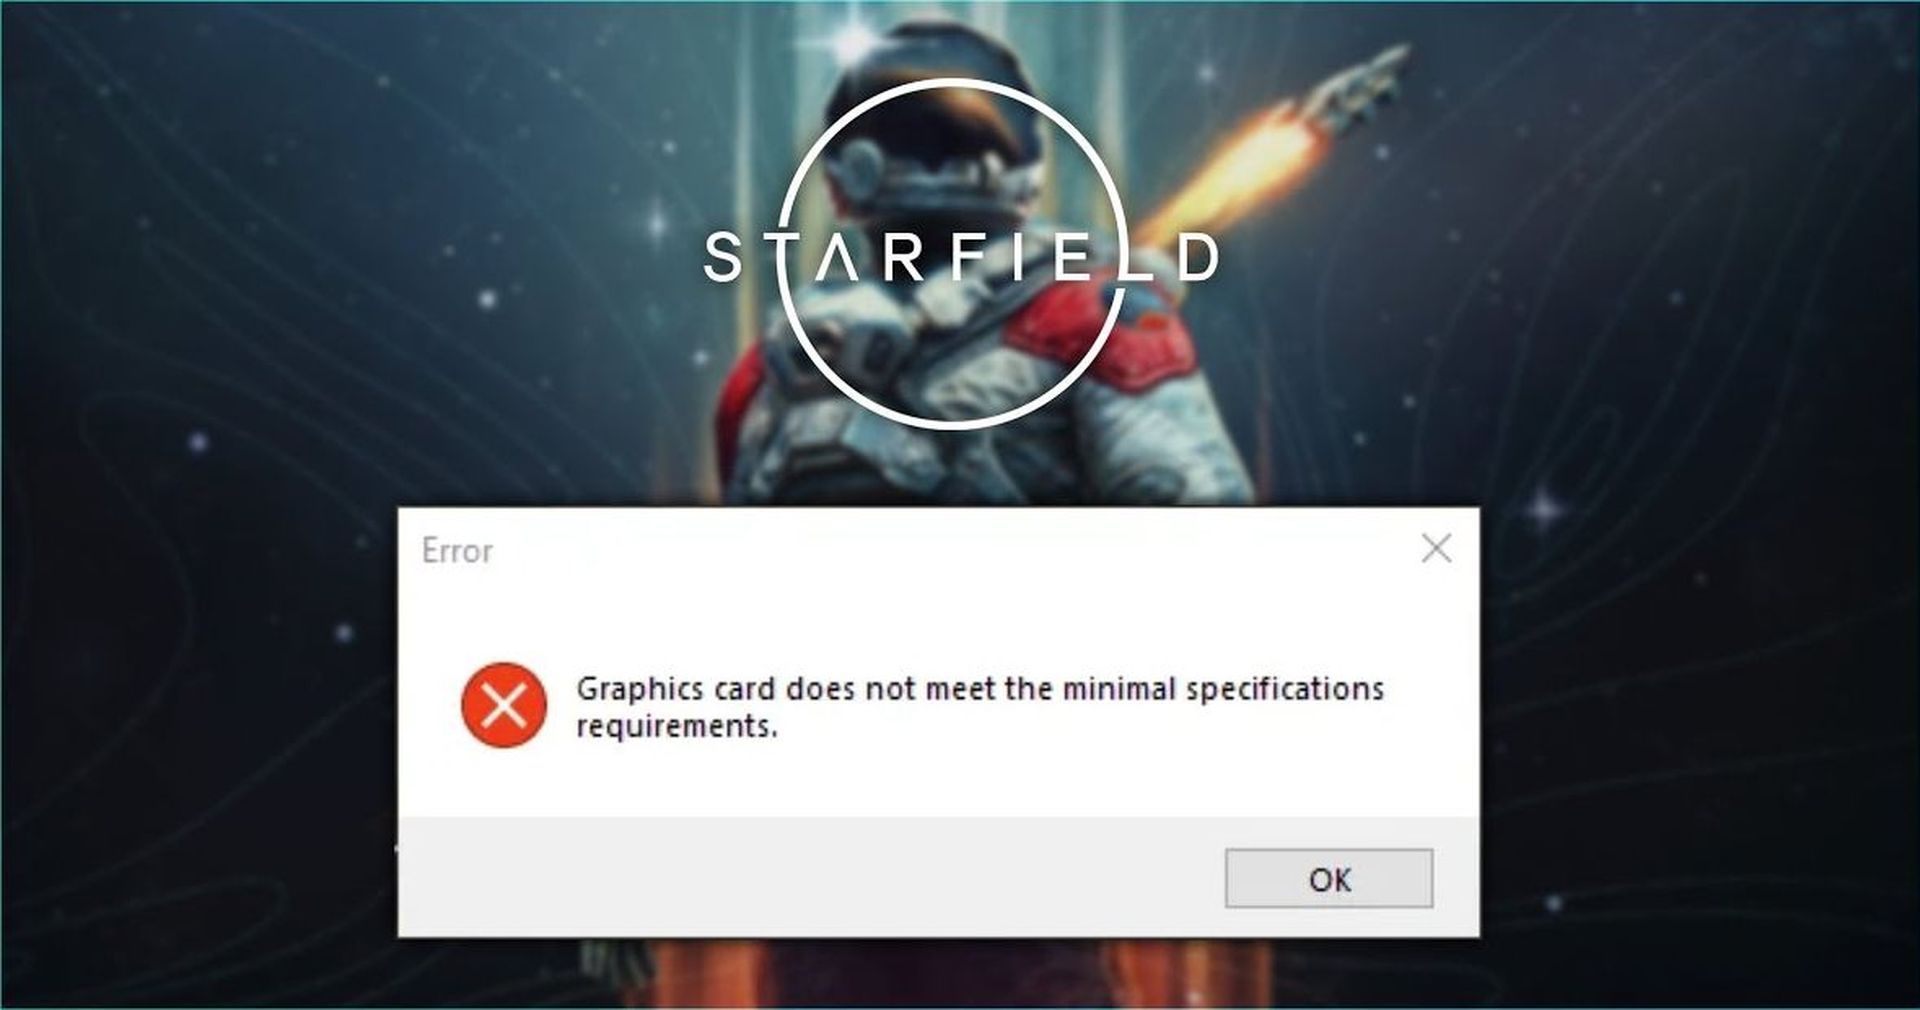  Starfield graphics card does not meet minimum requirements